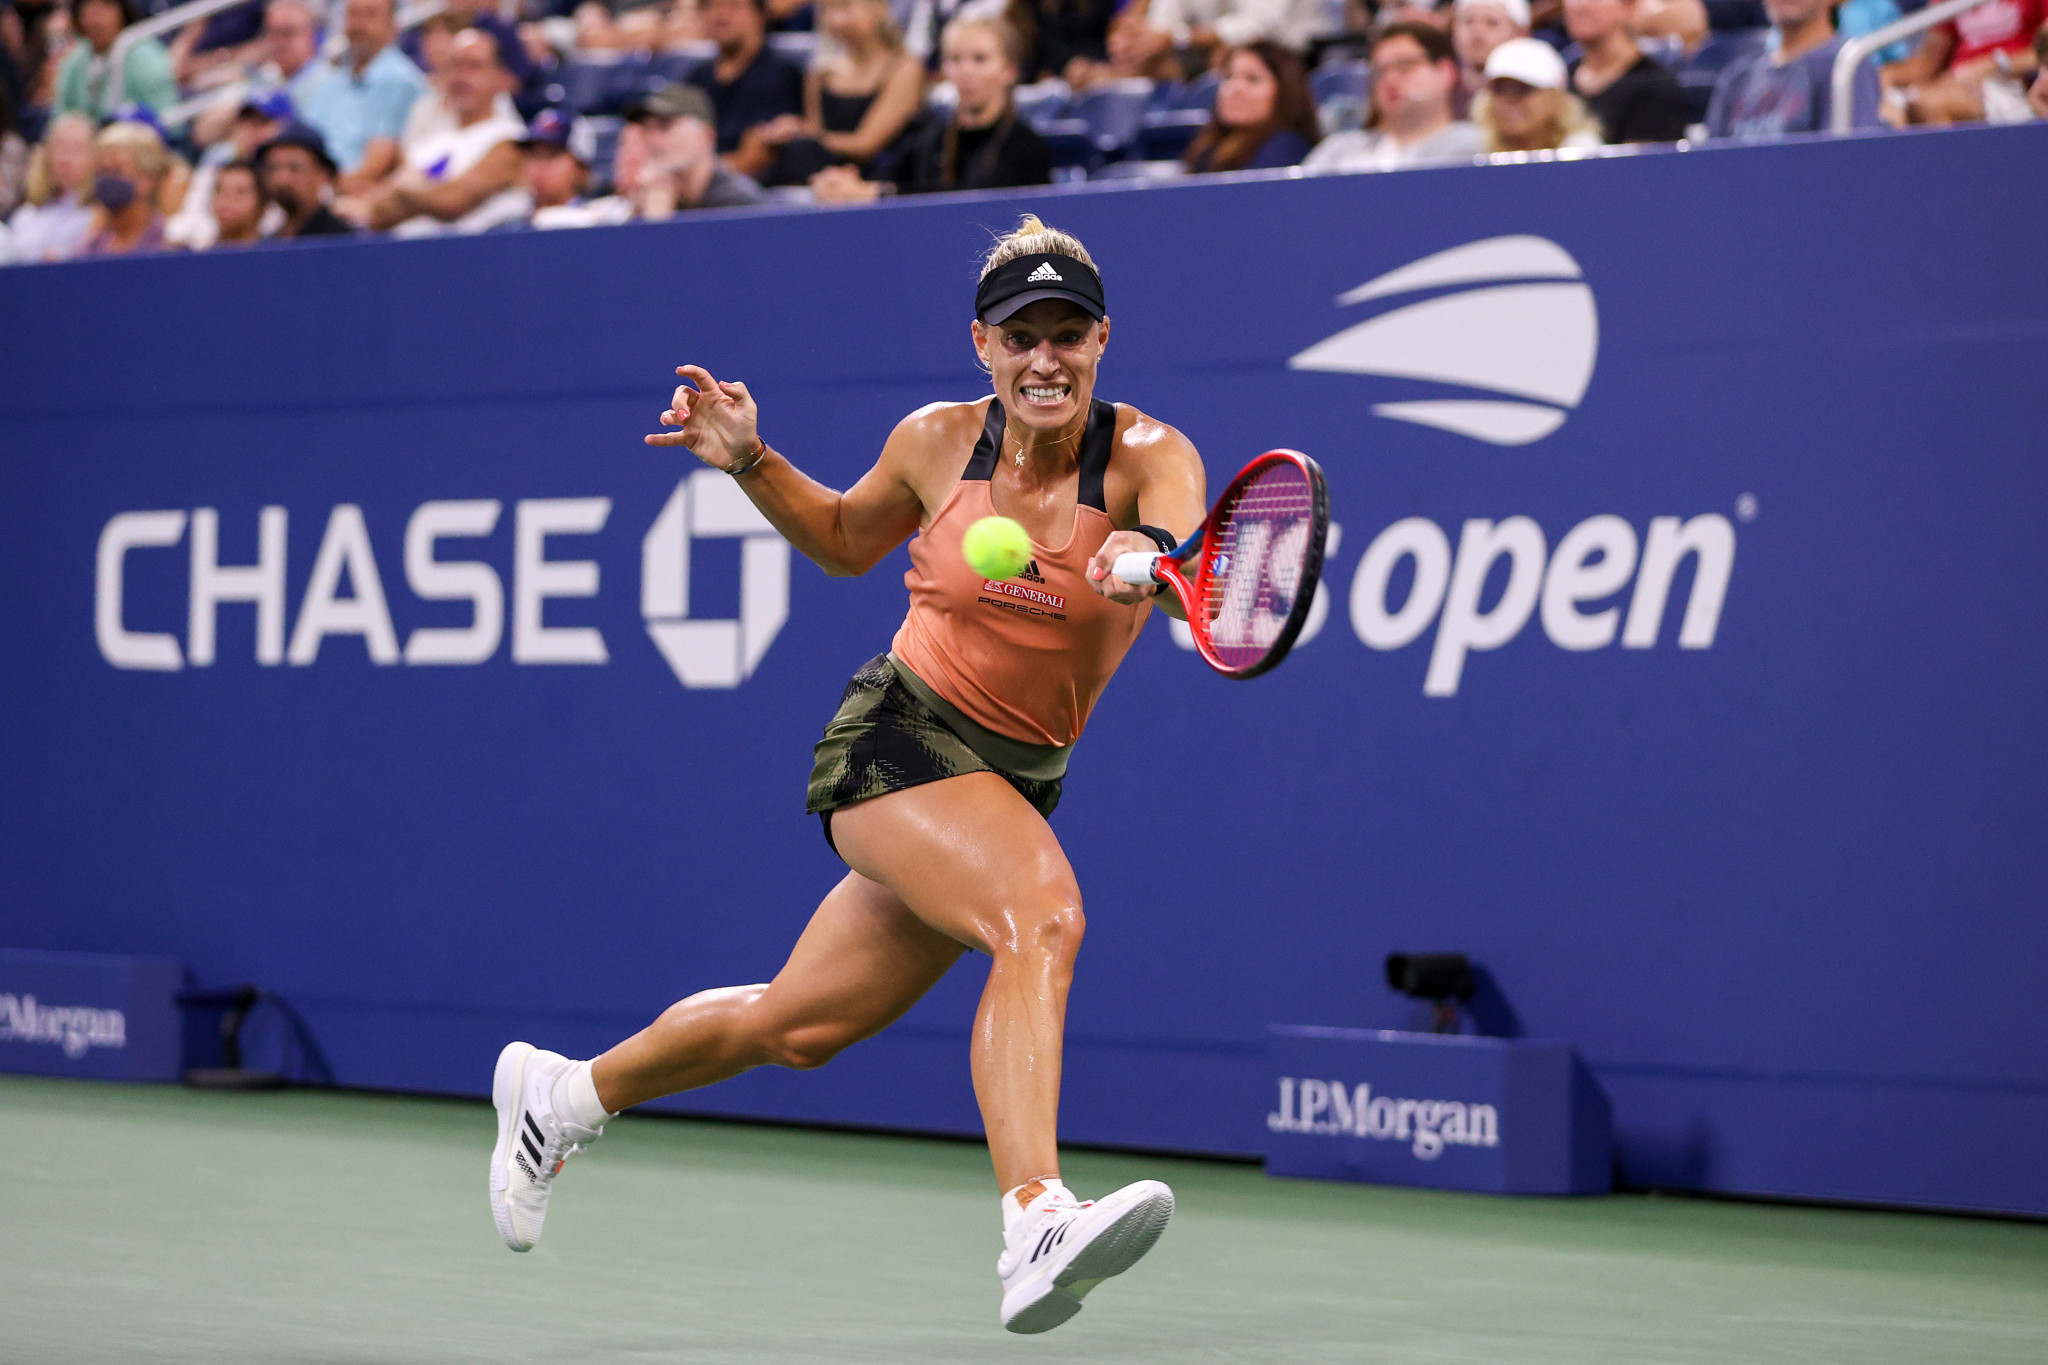 Angelique Kerber, the 2016 US Open champion, was beaten by Fernandez in three sets ©Getty Images